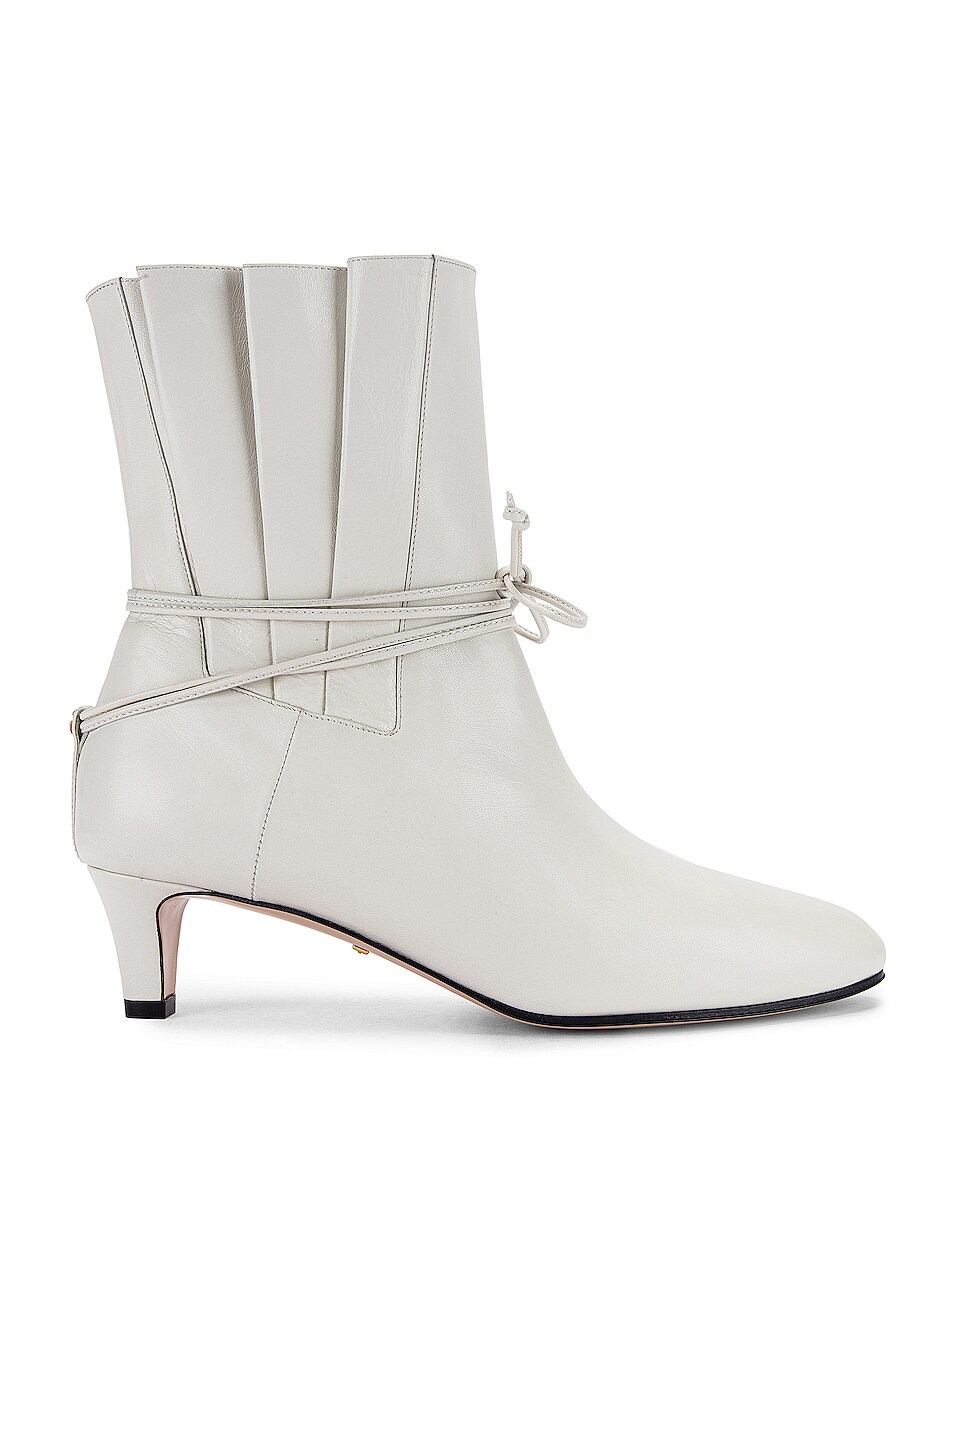 Image 1 of Gucci Leather Ankle Boots in Dusty White